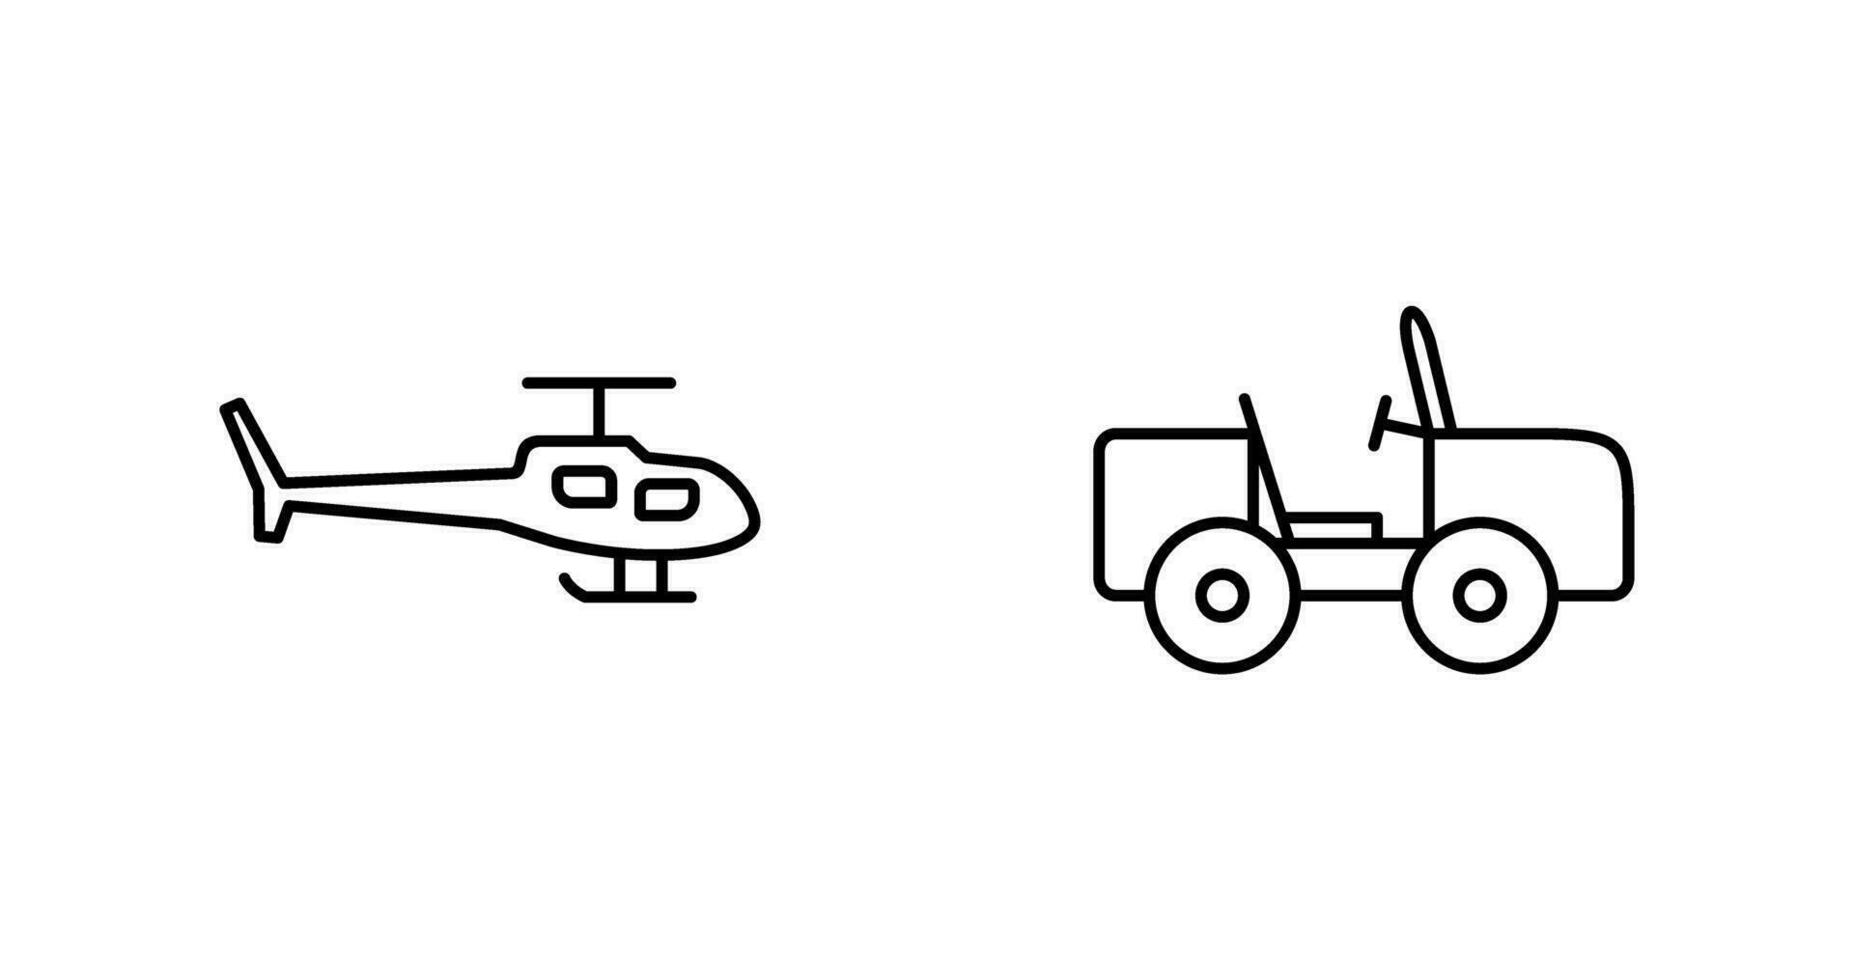 Helicopter and Safari Icon vector